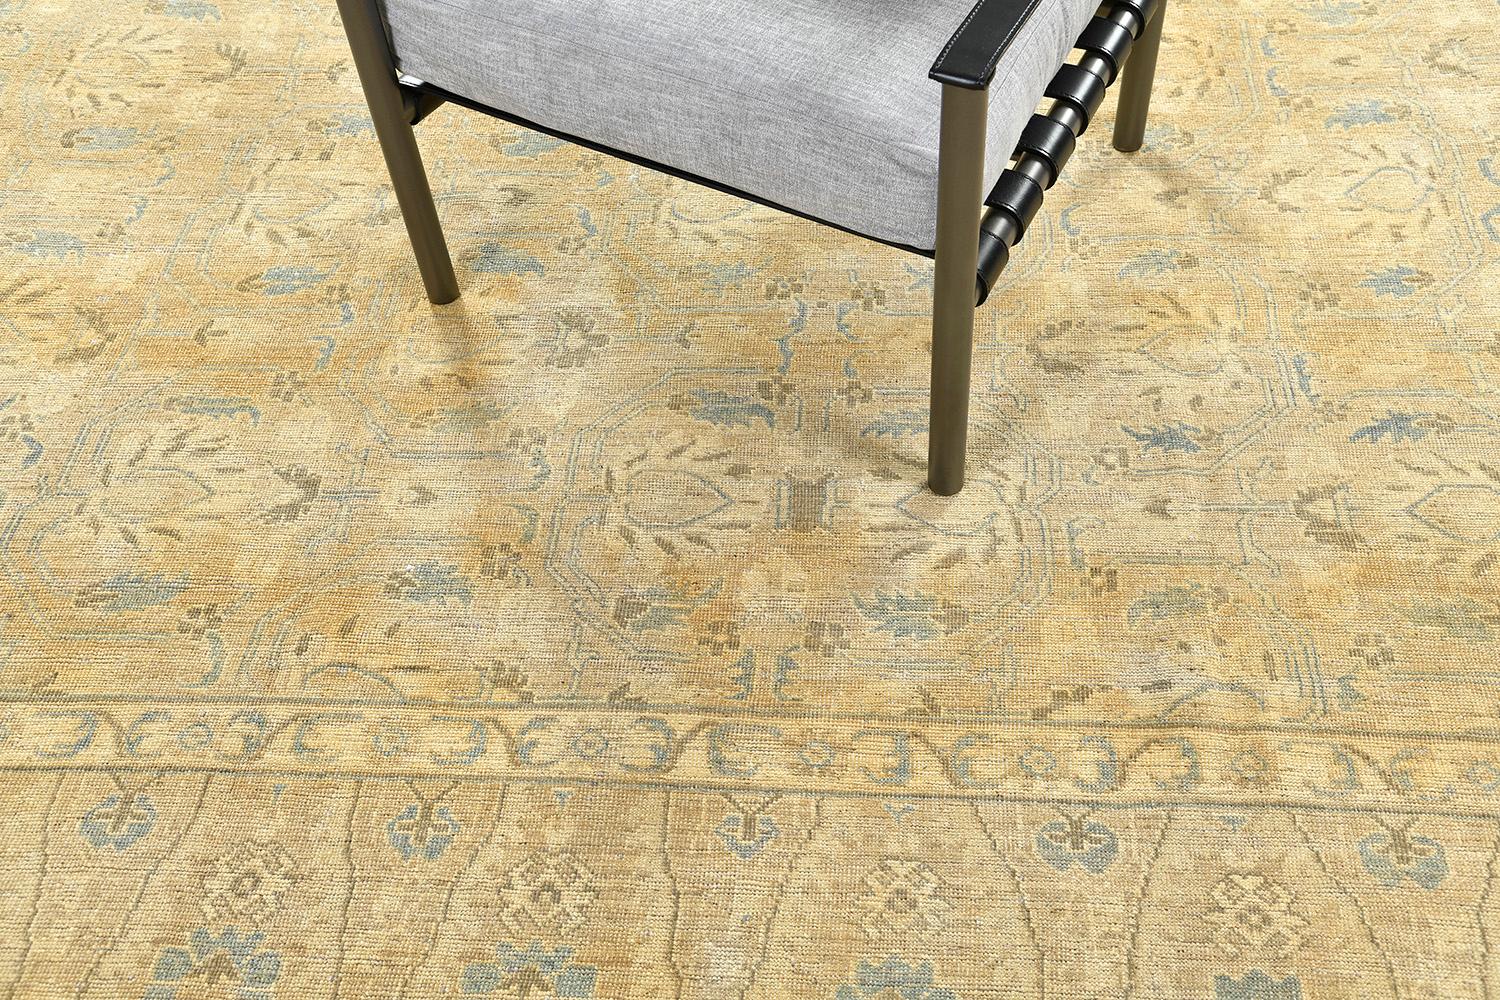 This Shawl Design rug is pile-woven wool that features the elegant floral pattern, geometric motifs, and grandiose embellishments, over gold and sage gray outlines. An intricate pattern is well-coordinated with blooming borders. It is formed